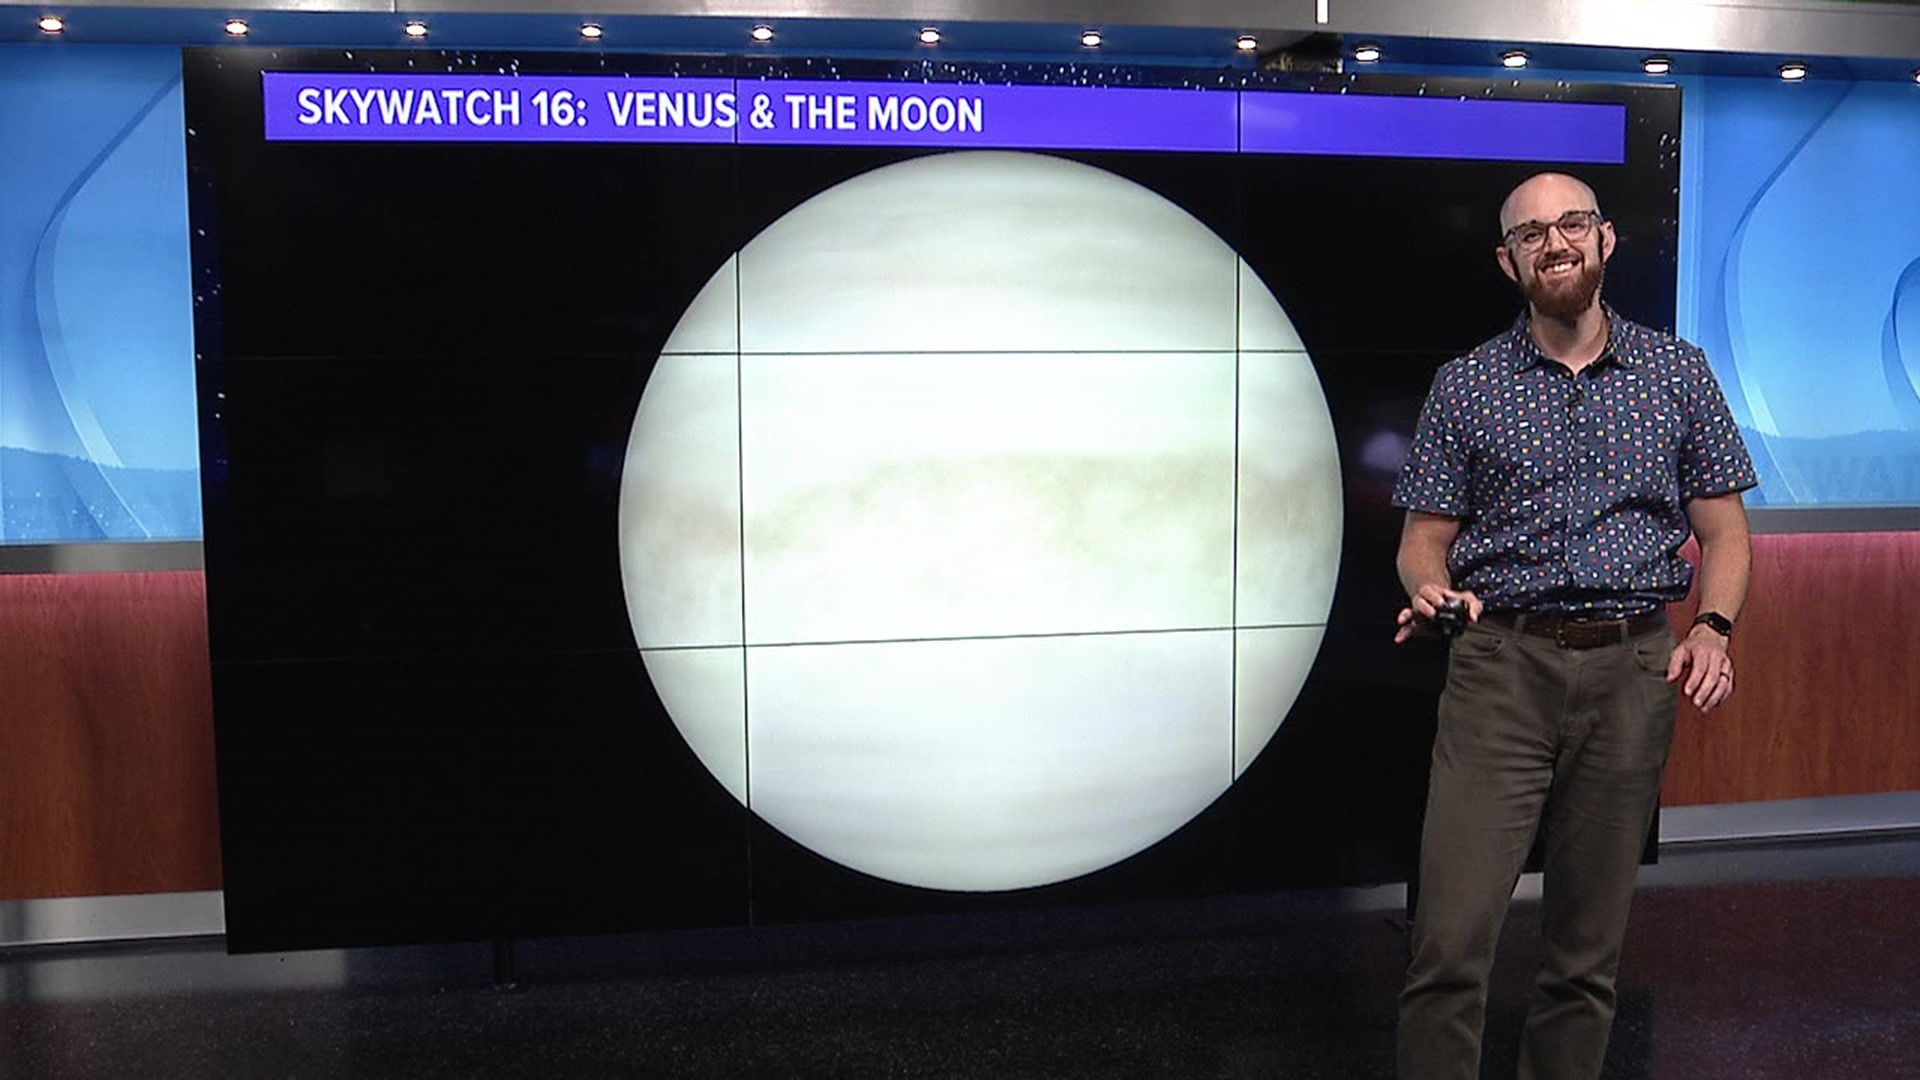 A bright planet will dazzle Skywatchers all week long. Meteorologist John Hickey shows us why we should be looking west in this week's Skywatch 16.